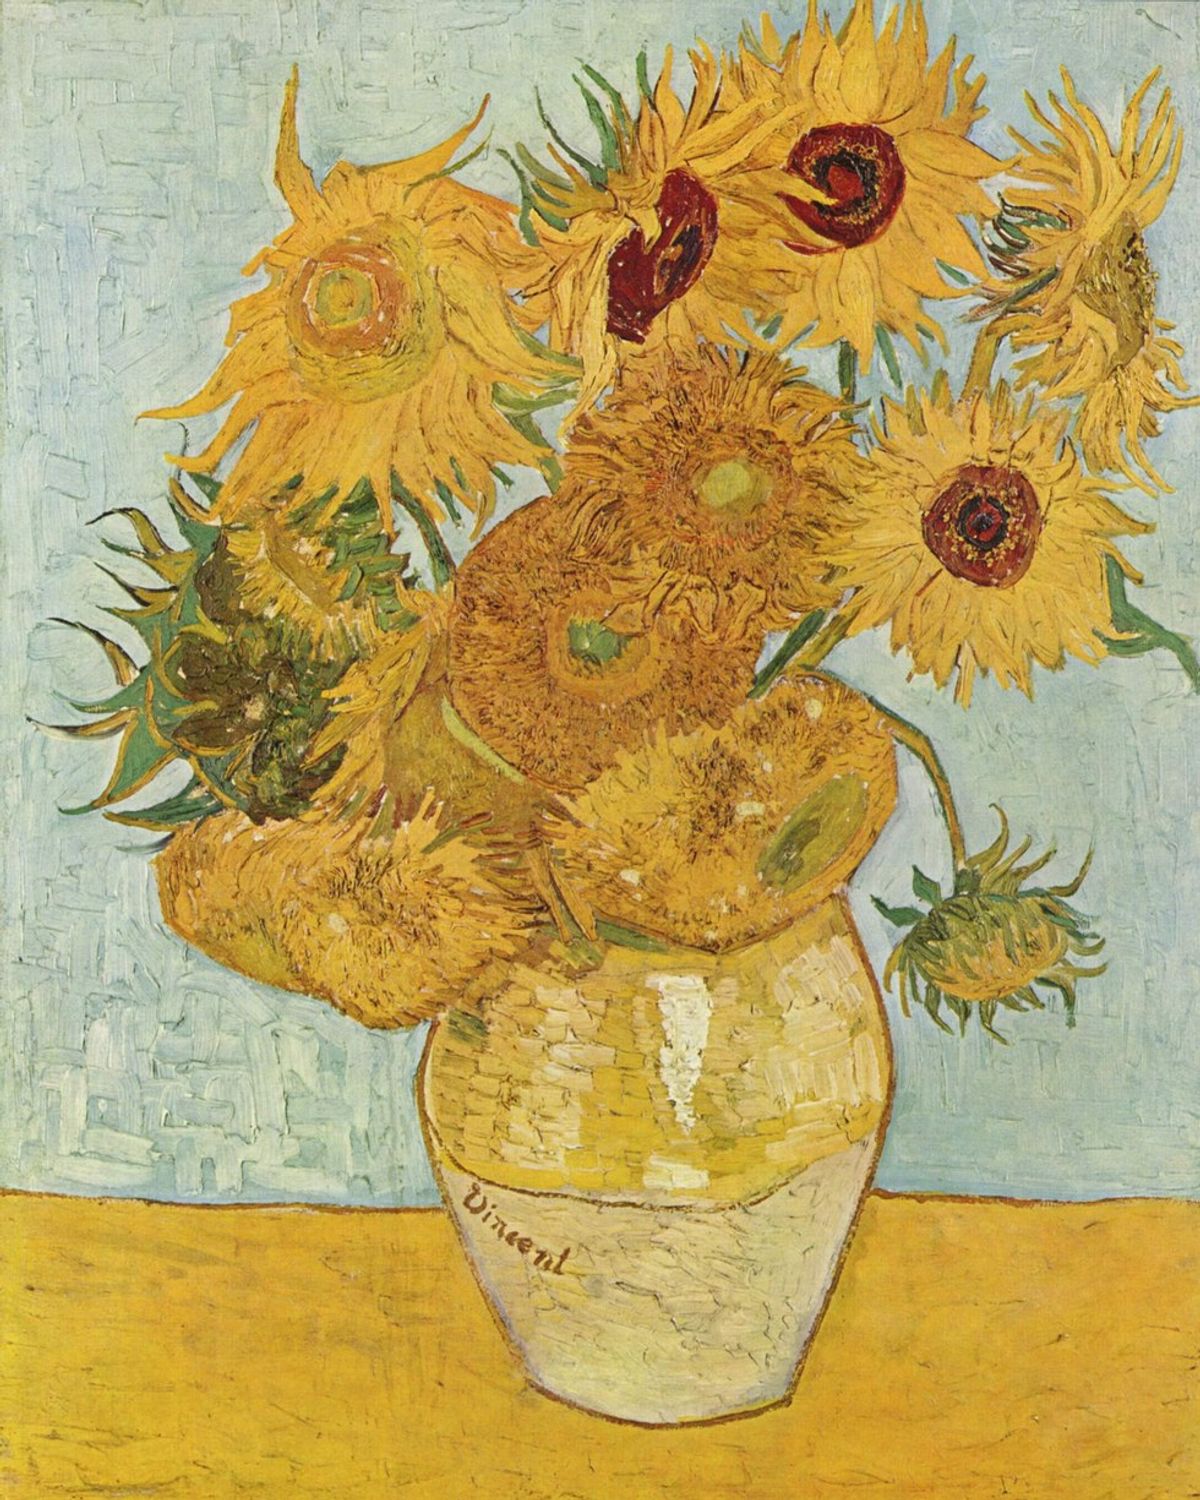 What Can We Learn About Depression From Van Gogh?